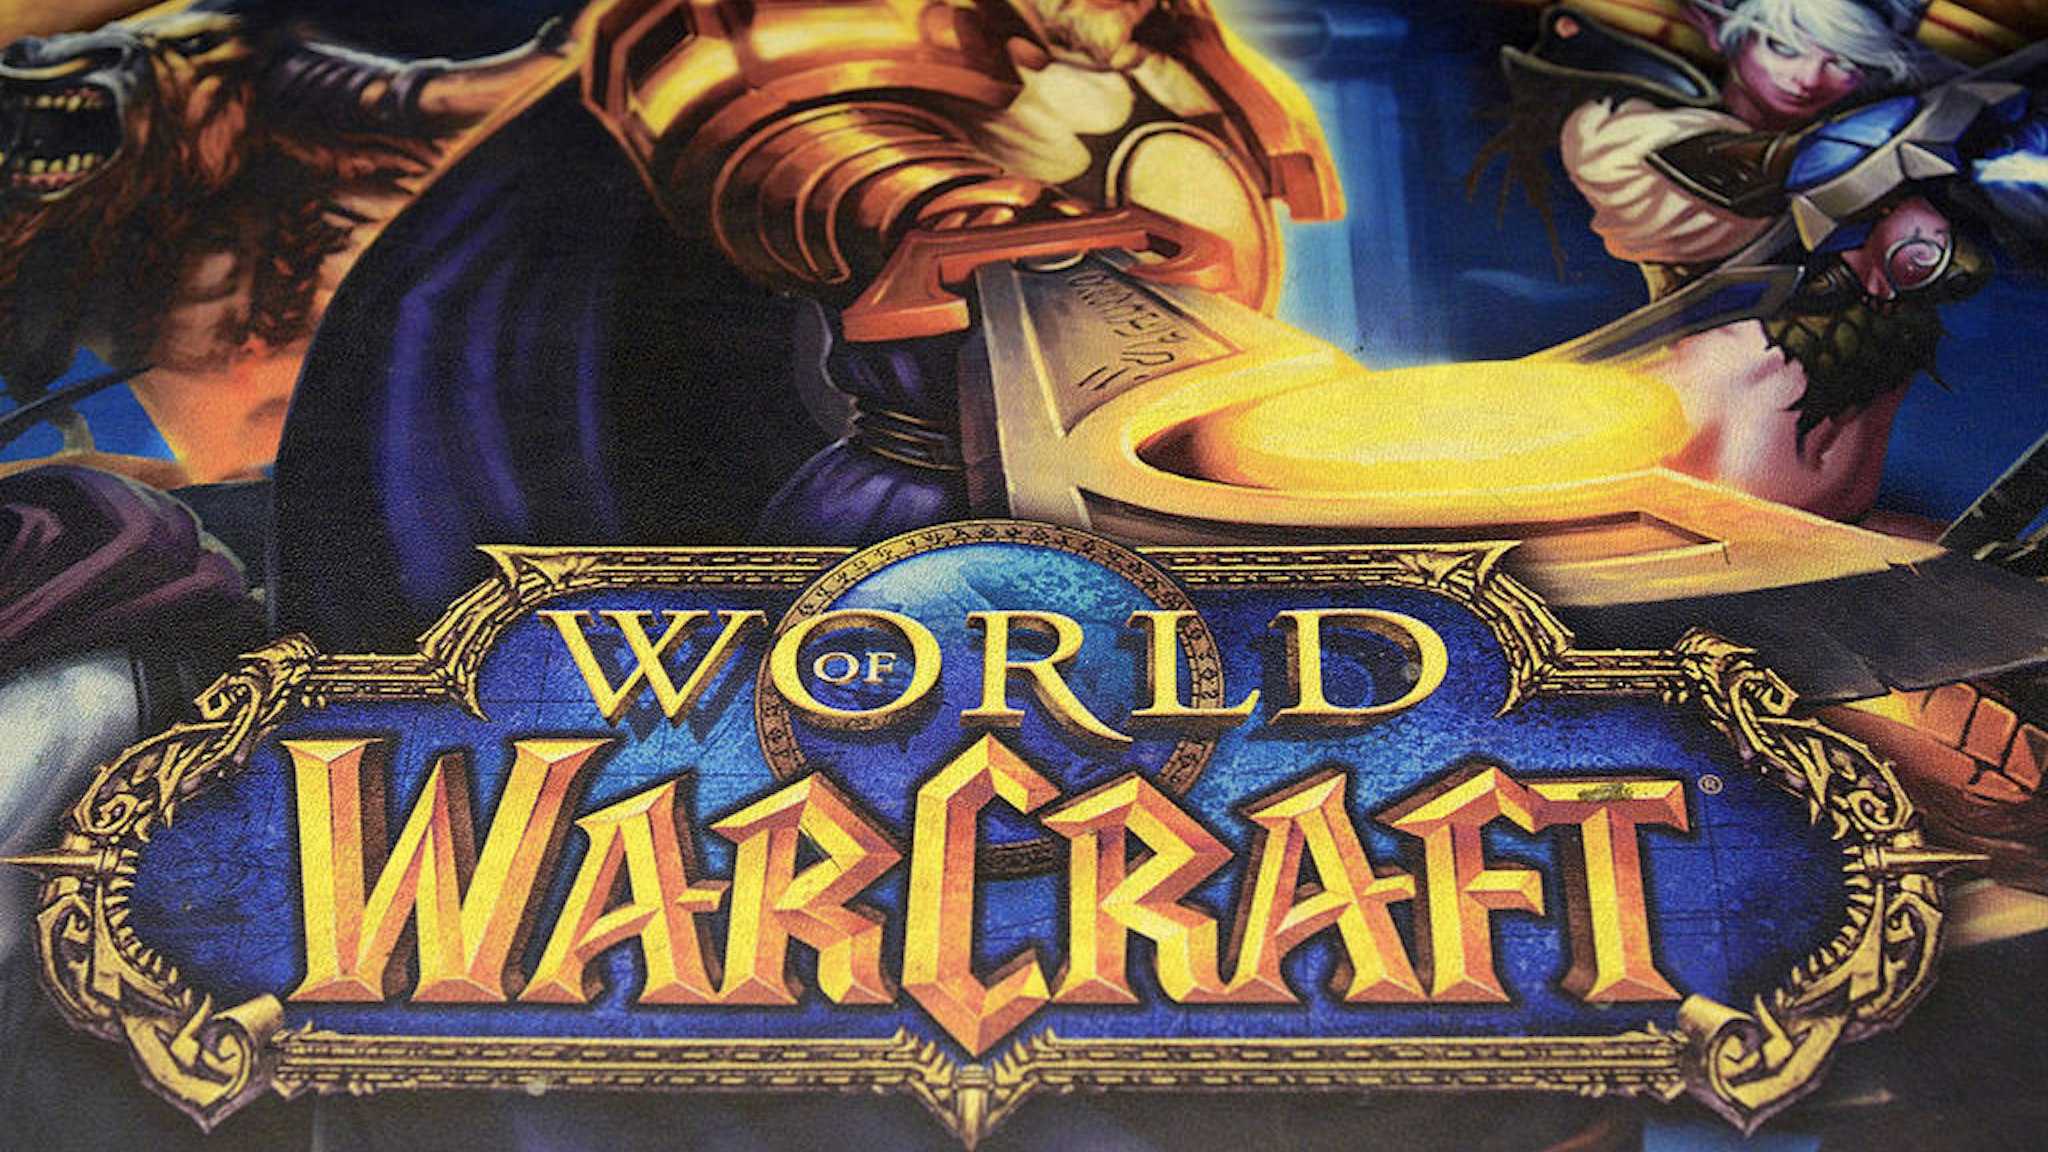 An advertisement for the ''World of Warcraft'' game, produced by Activision Blizzard Inc., a video-game publishing unit of Vivendi SA, is displayed at a store in Paris, France, on Saturday, May 12, 2012. Vivendi SA would stand to boost the lowest valuations of Chief Executive Officer Jean-Bernard Levy's seven-year tenure by breaking up businesses ranging from phone providers to video games and pay television. Photographer: Fabrice Dimier/Bloomberg